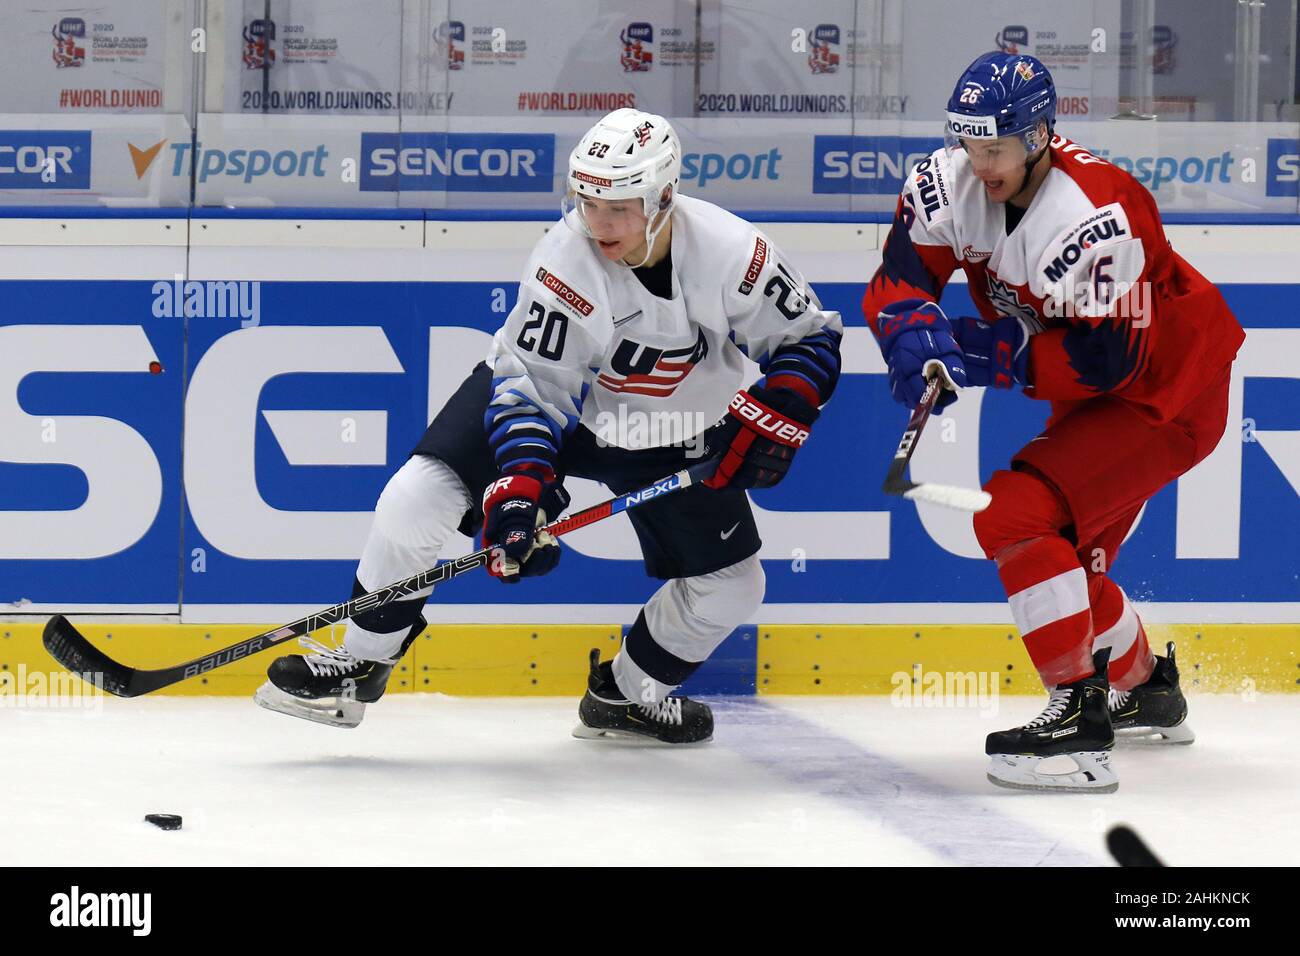 L-R Parker Ford (USA) and Adam Raska (CZE) in action during the 2020 IIHF World Junior Ice Hockey Championships Group B match between USA and Czech Re Stock Photo